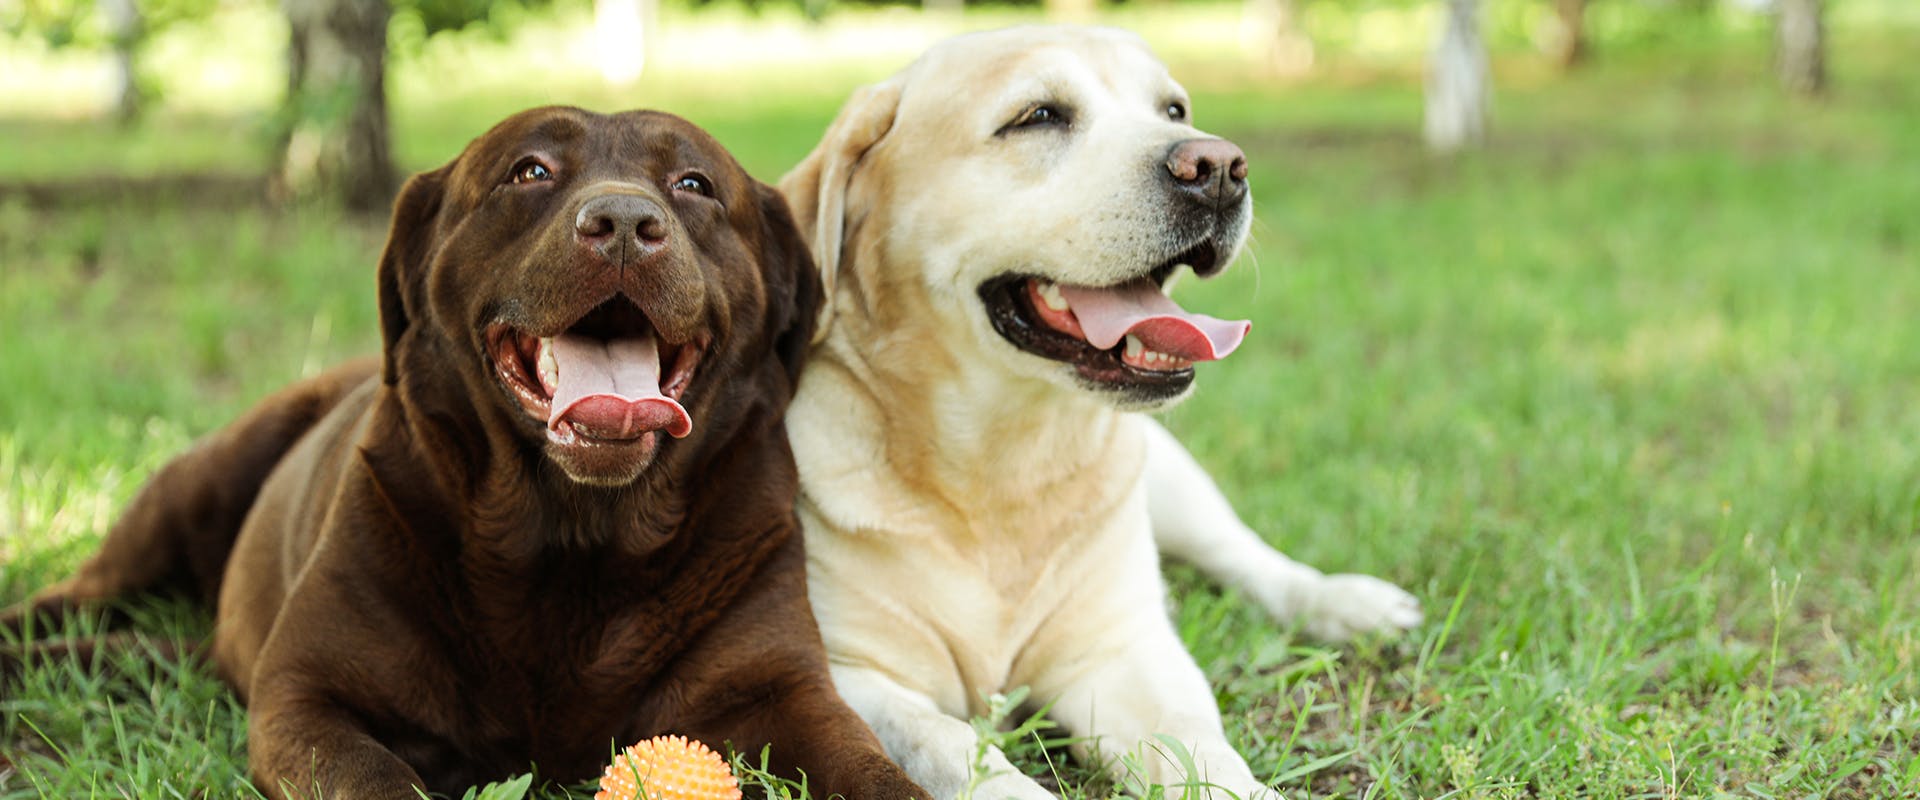 Two Labrador Retrievers, one chocolate, one yellow, sitting side-by-side on a field of grass